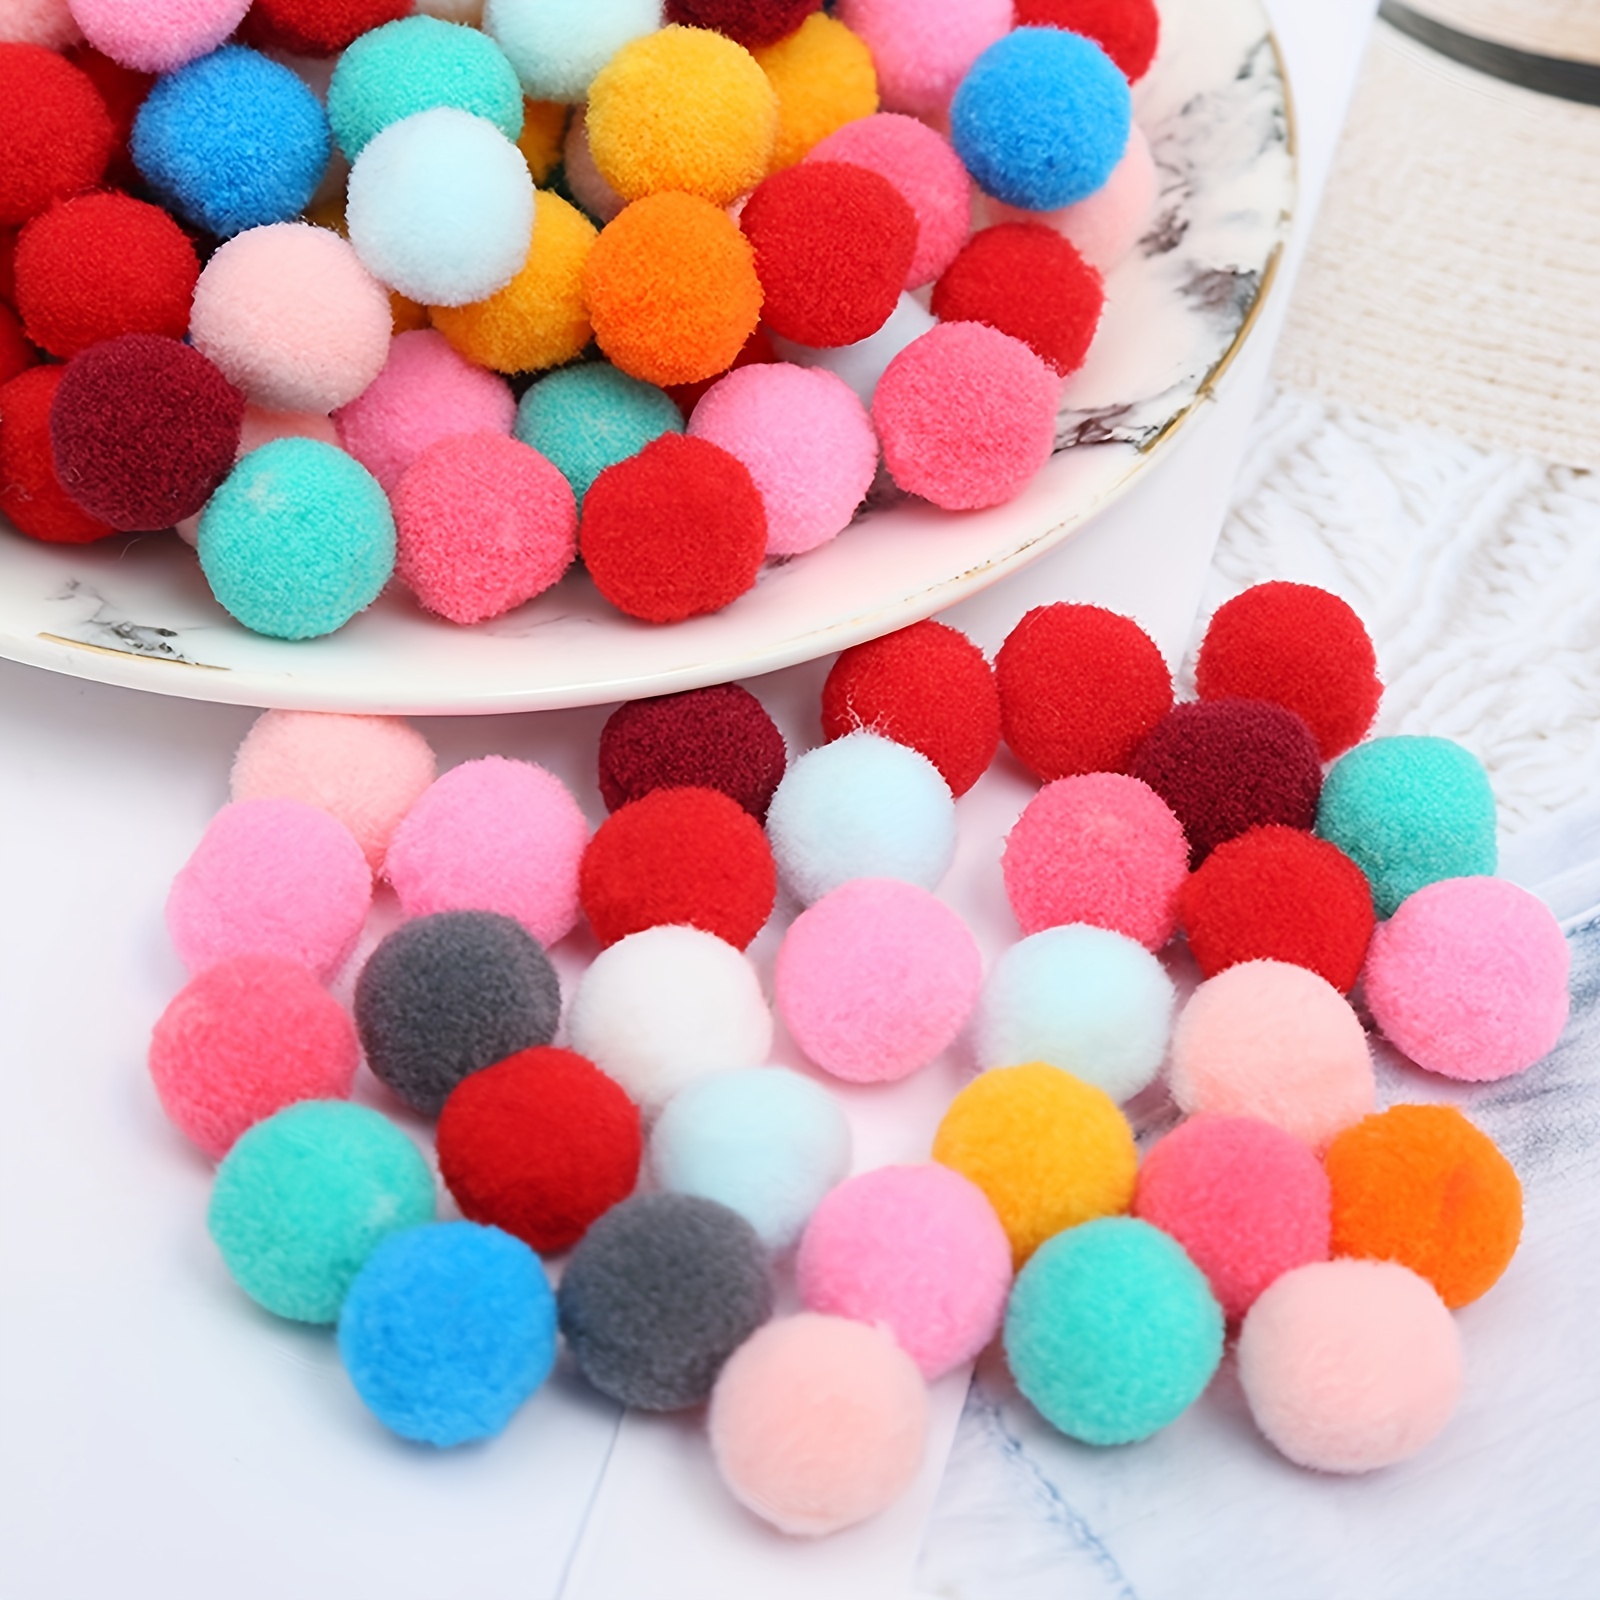 250pcs Arts And Crafts - Colorful Assorted Pompoms, Rainbow Puff Cotton  Balls For Crafts DIY Project Home Party Holiday Creative Decorations